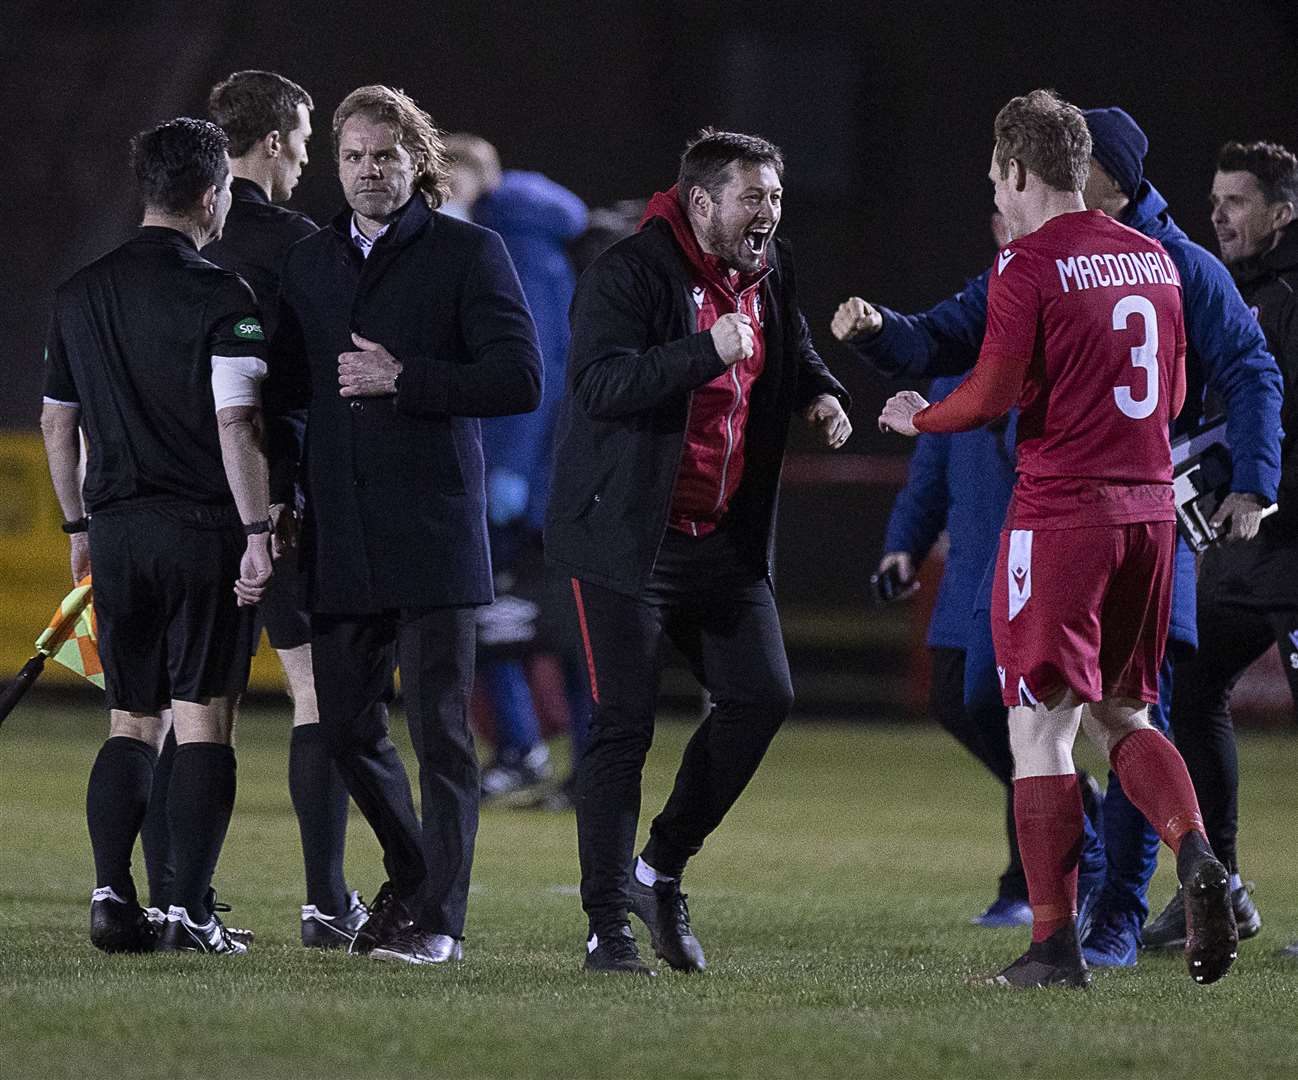 Picture - Ken Macpherson, Inverness. Scottish Cup. Brora Rangers(2) v Hearts(1). 23.03.21. Brora celebrate beside Hearts manager Robbie Neilson at the end.